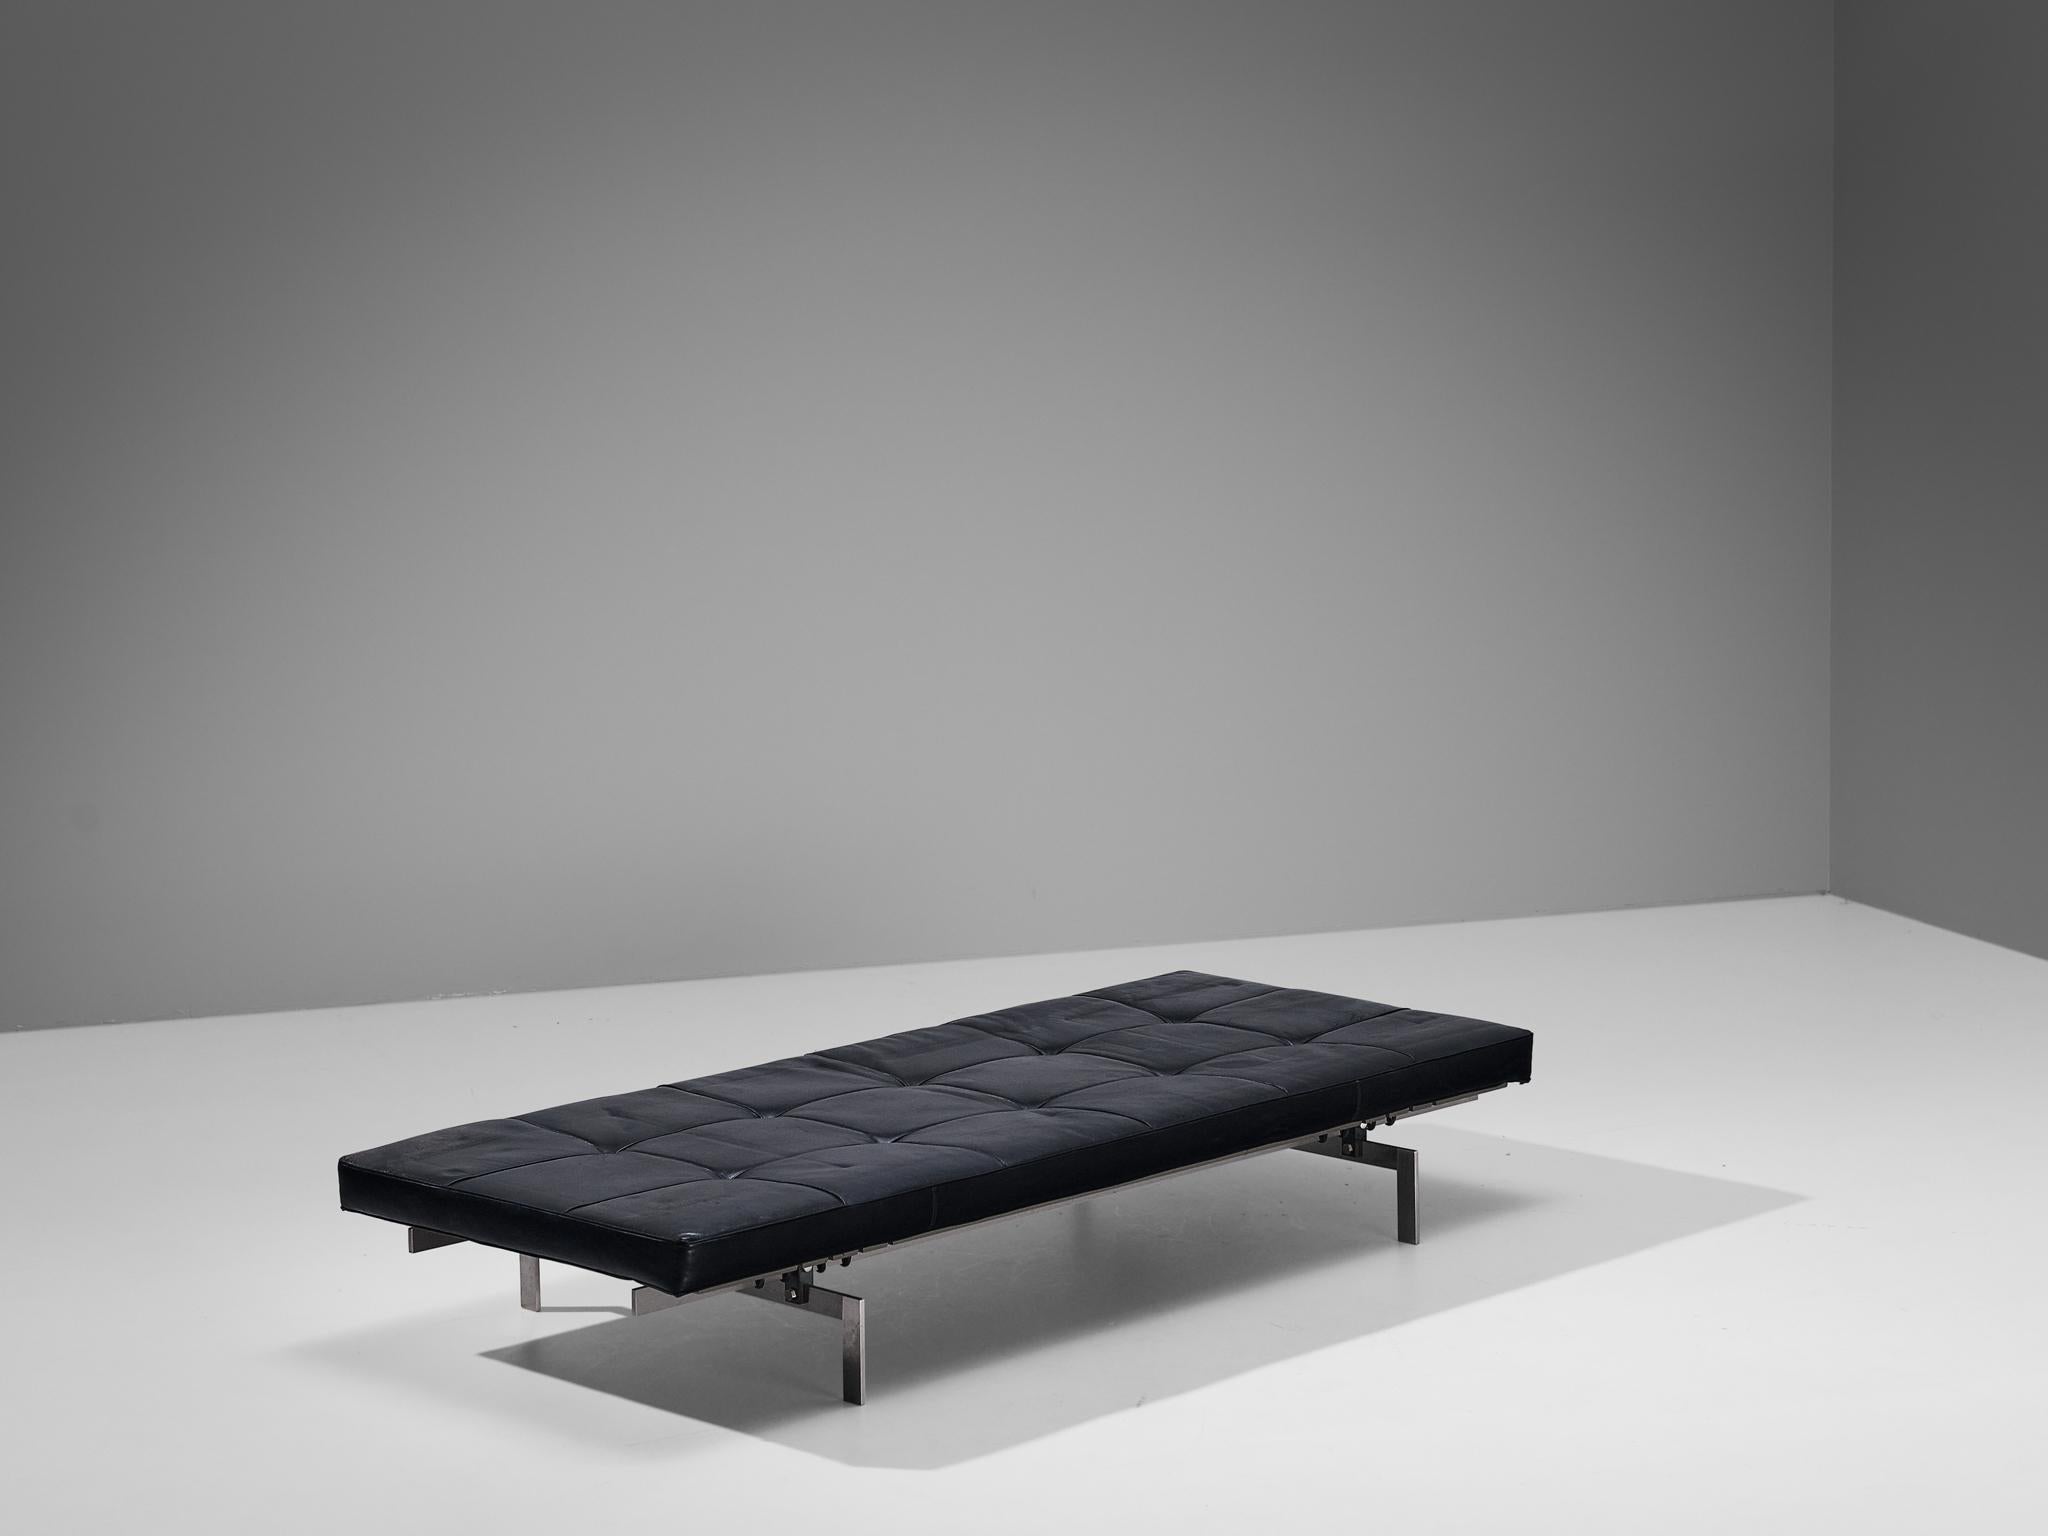 Mid-20th Century Poul Kjærholm for E. Kold Christensen 'PK80' Daybed in Leather and Steel 